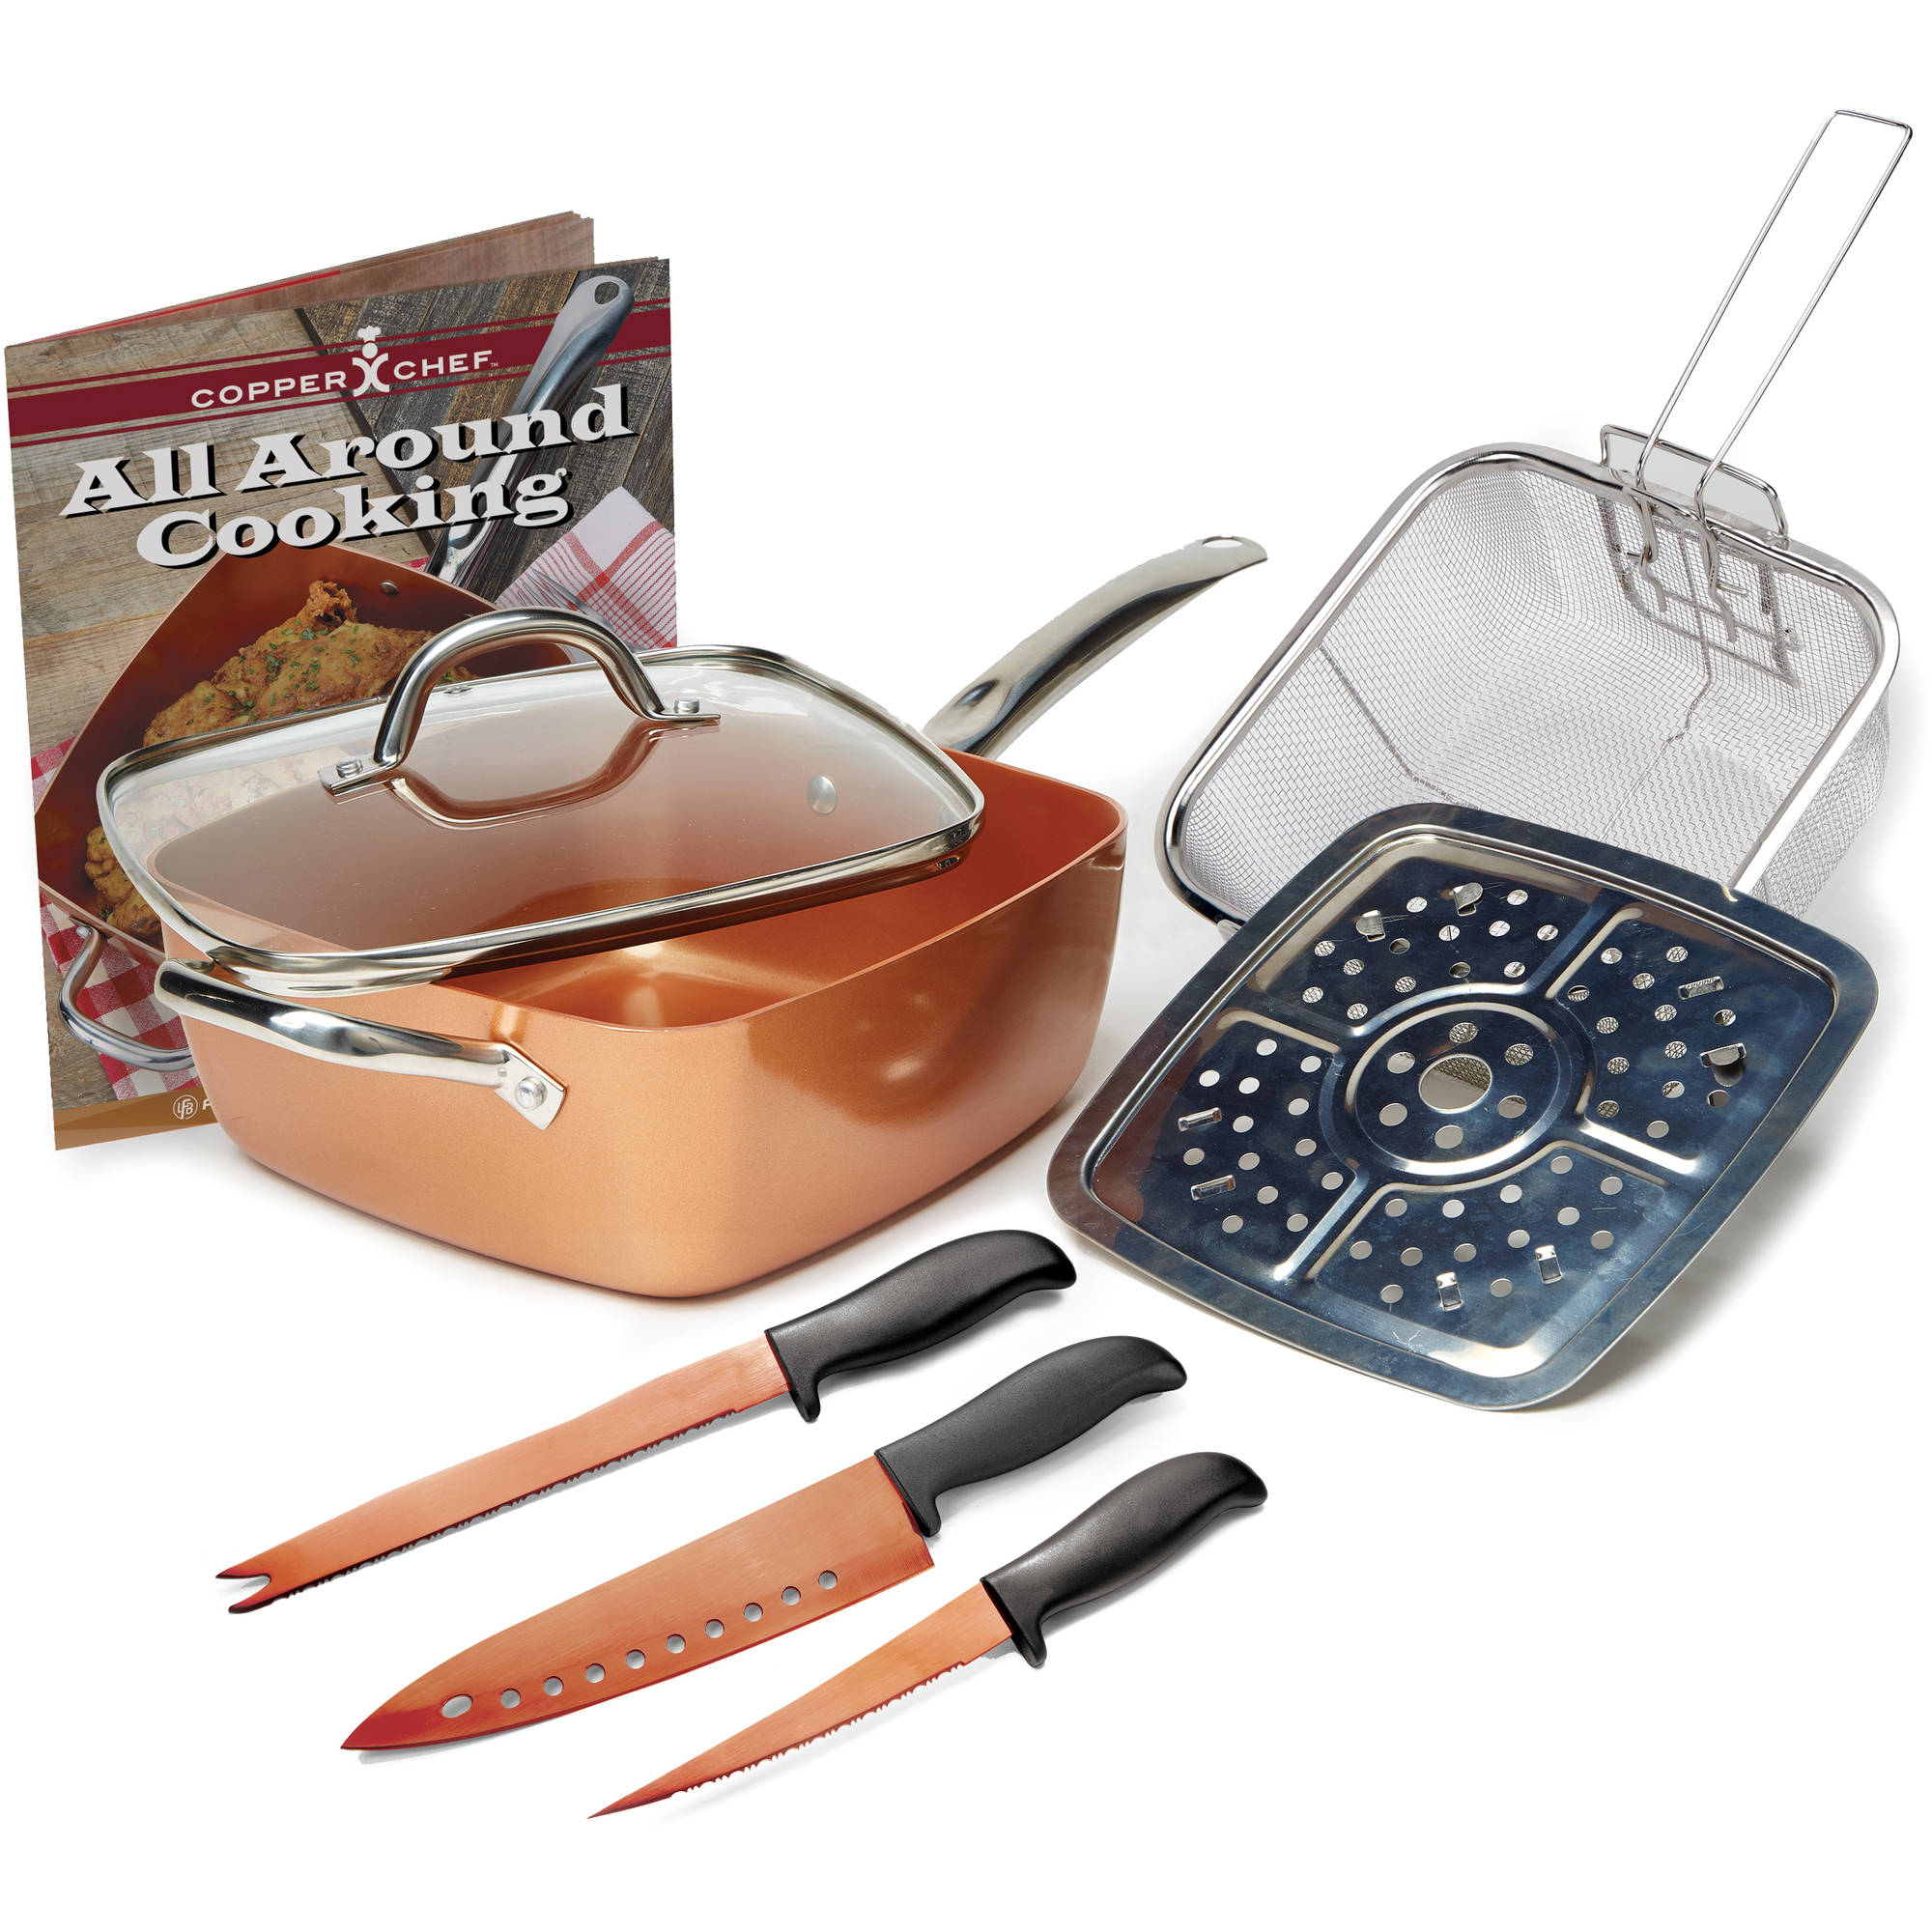 Copper Chef Cookware Set, 8 Piece - image 1 of 2